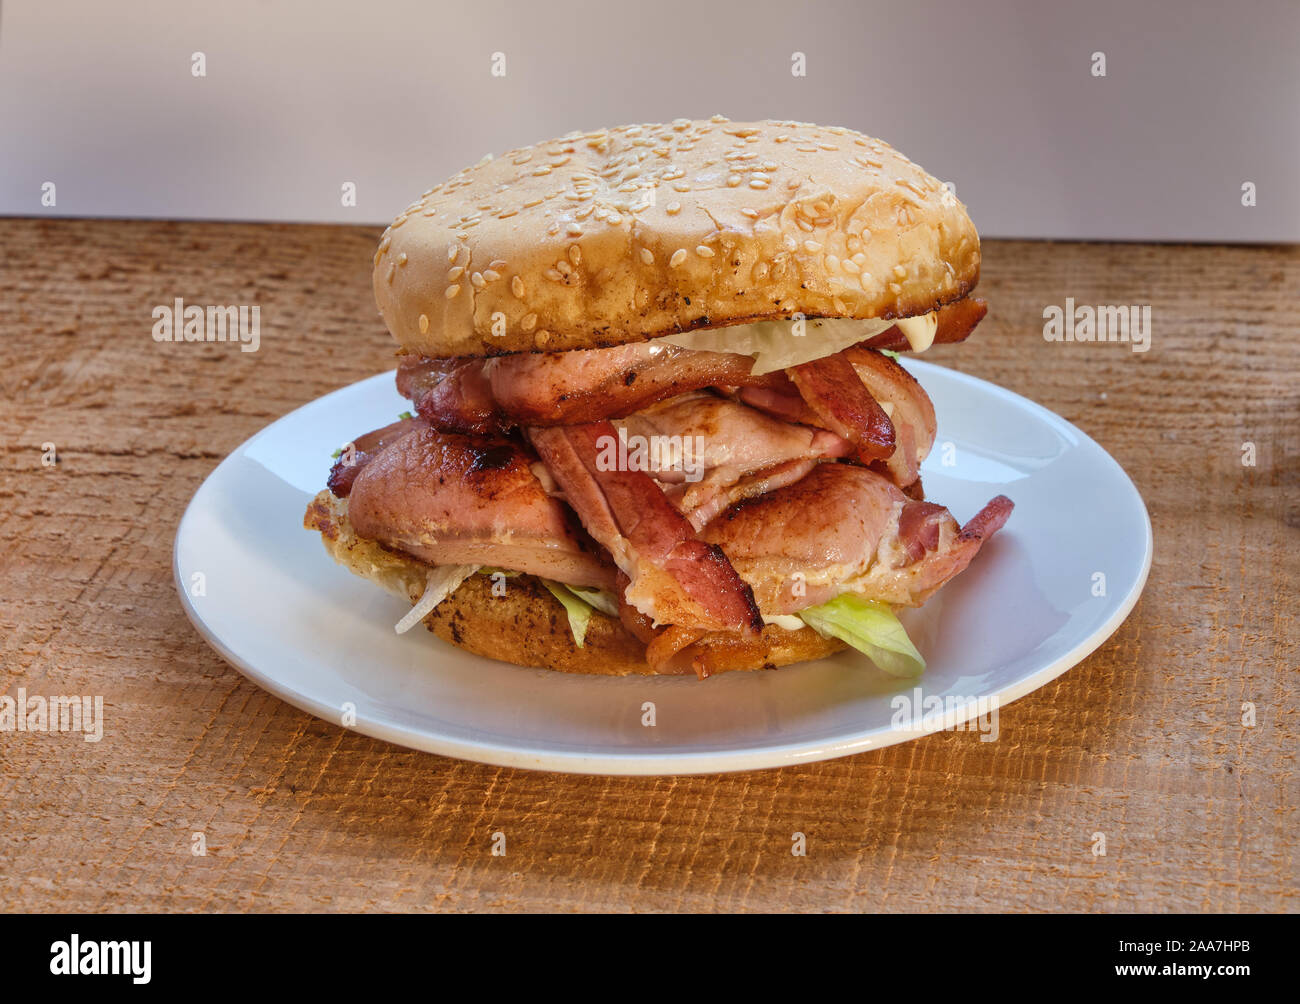 Bacon roll or butty with lettuce on a white plate and wooden board in a sesame coated roll or bap Stock Photo